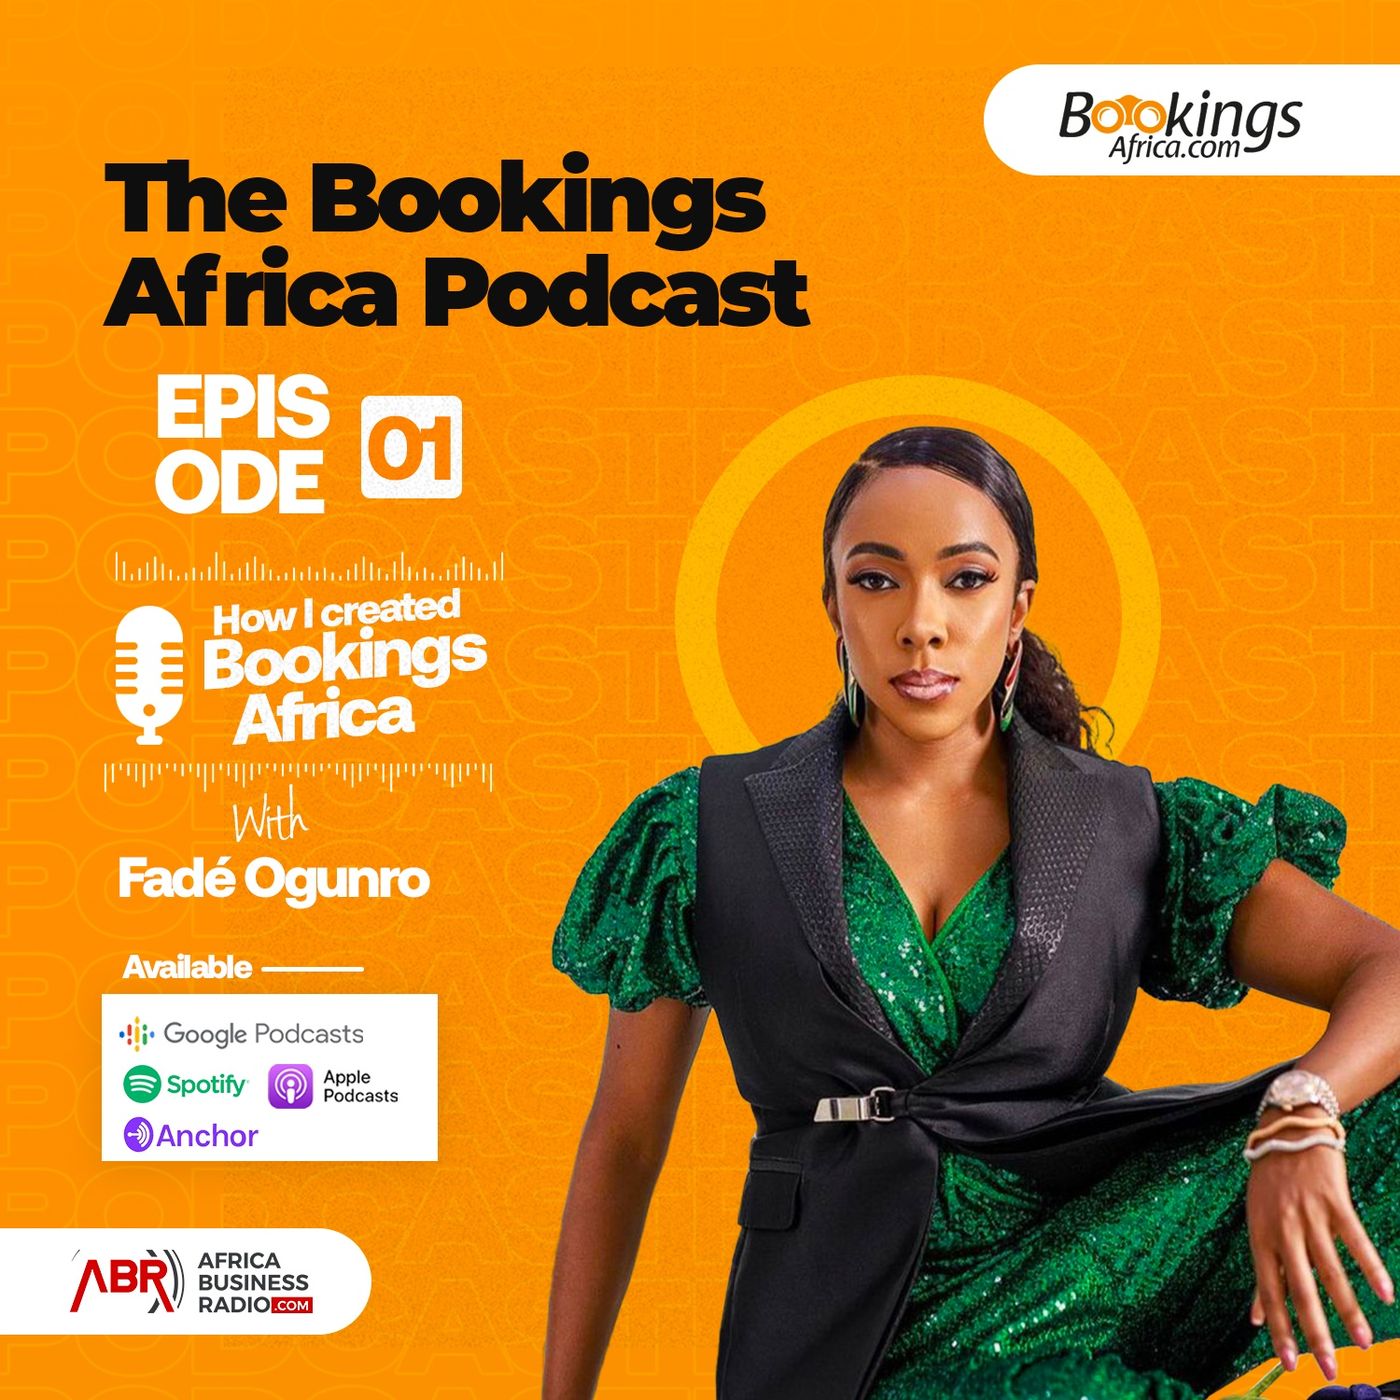 The Bookings Africa Podcast image